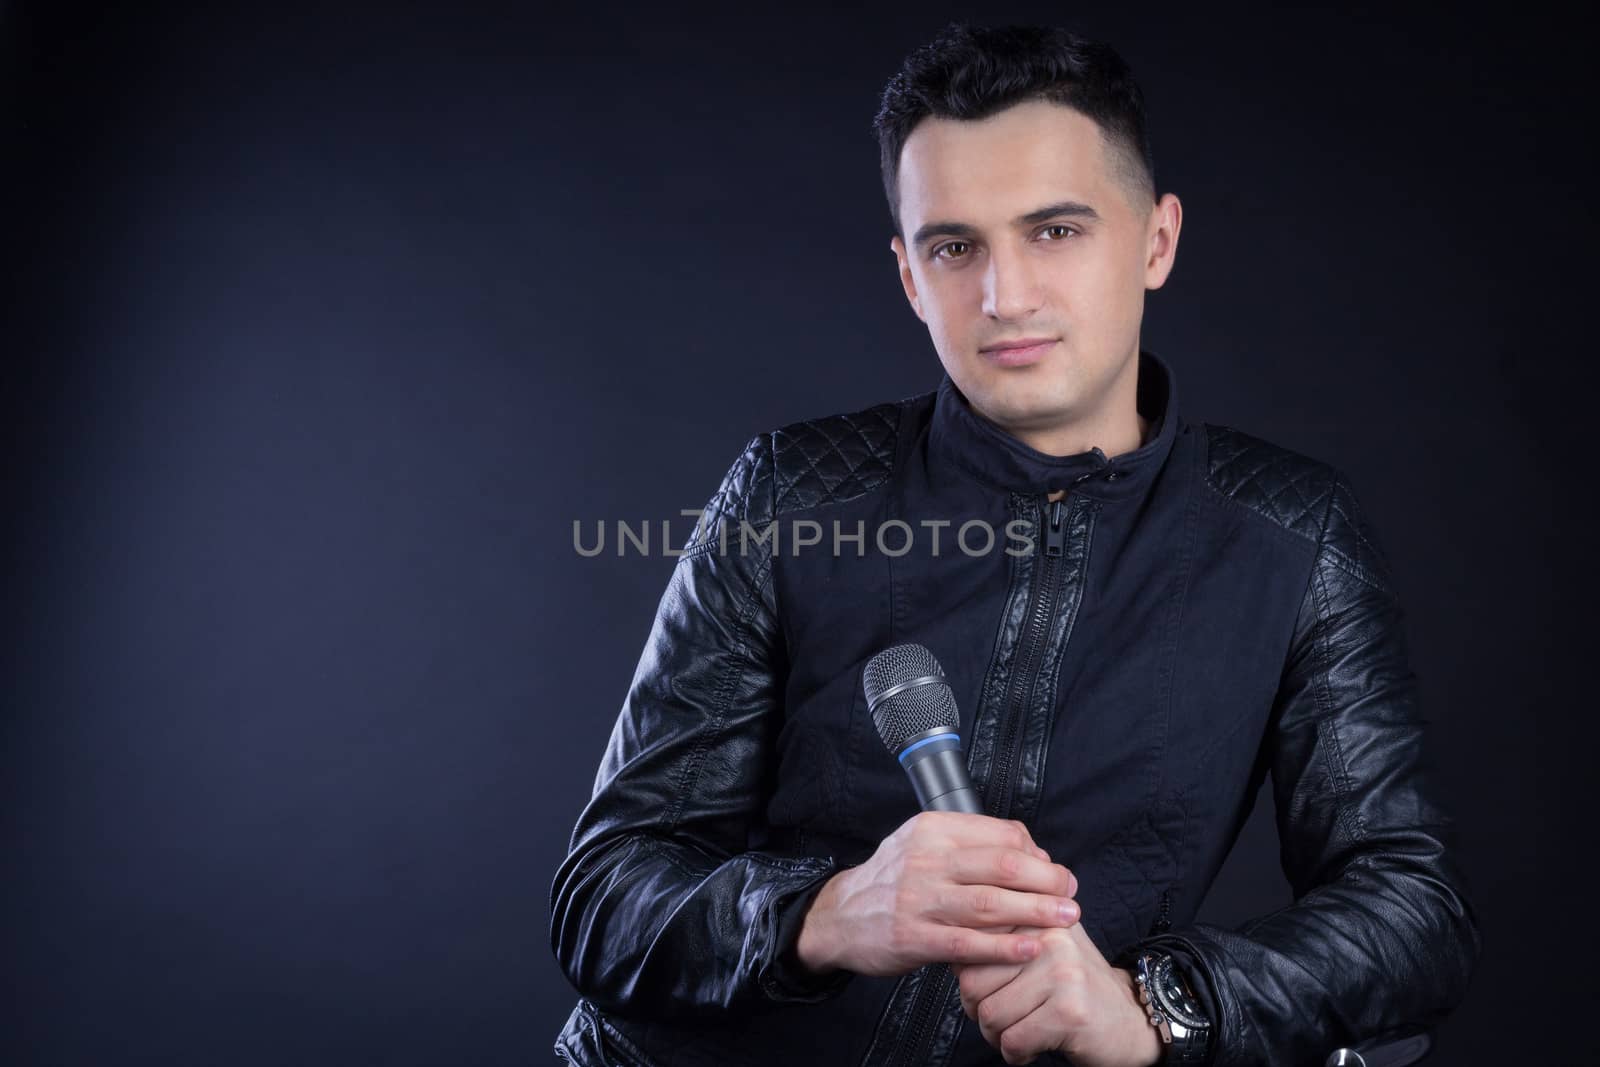 Young black-haired man dressed in black and white poses singing to microphone